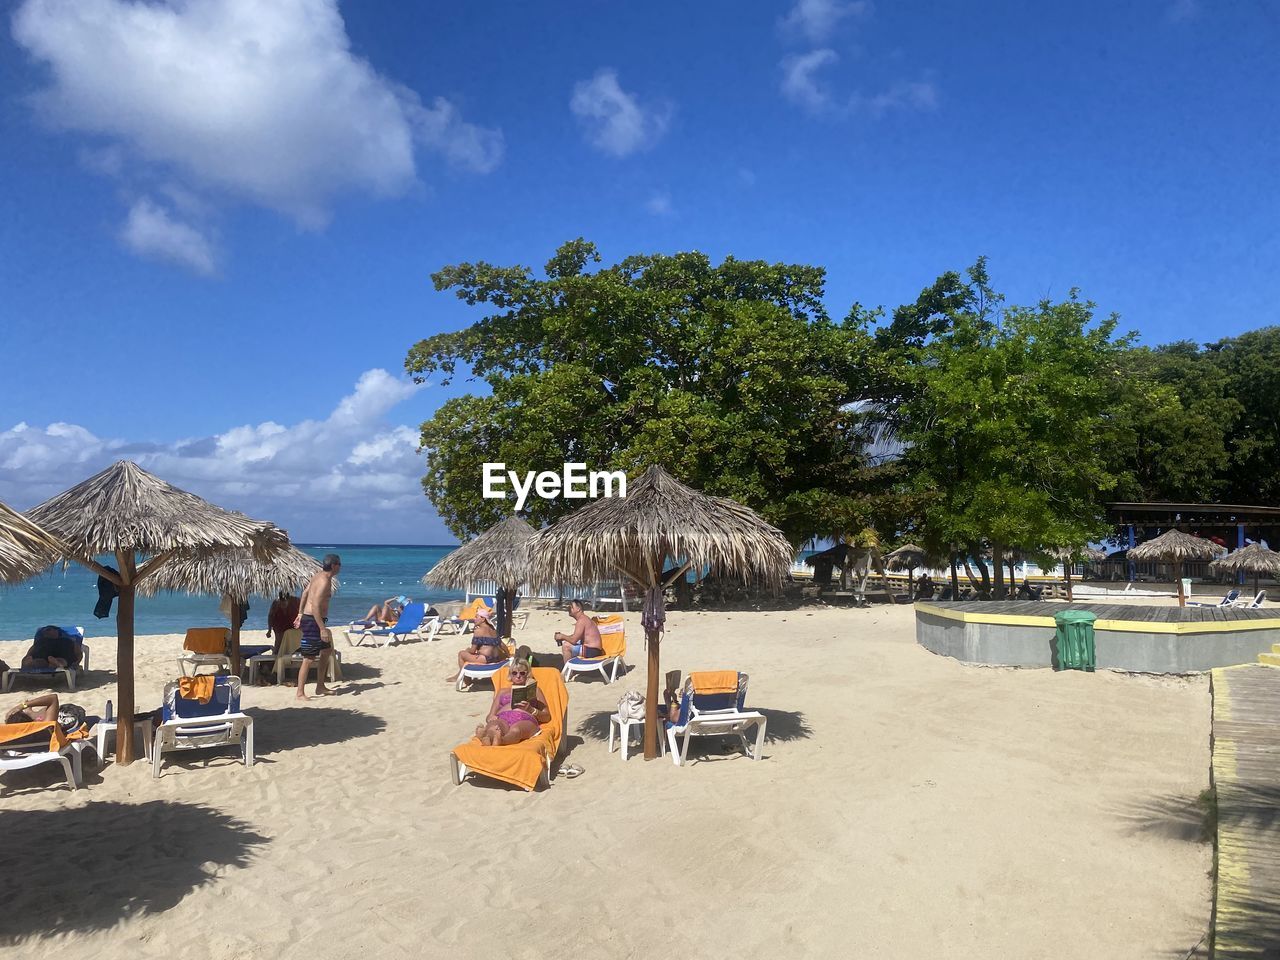 sky, beach, land, nature, tree, sand, water, vacation, chair, trip, sea, holiday, plant, travel destinations, parasol, cloud, summer, sunshade, sunlight, lounge chair, relaxation, body of water, day, travel, beauty in nature, resort, umbrella, beach umbrella, thatched roof, seat, tropical climate, scenics - nature, blue, outdoors, shade, tourism, group of people, architecture, sunny, leisure activity, hut, coast, tranquility, shore, tourist resort, shadow, ocean, tourist